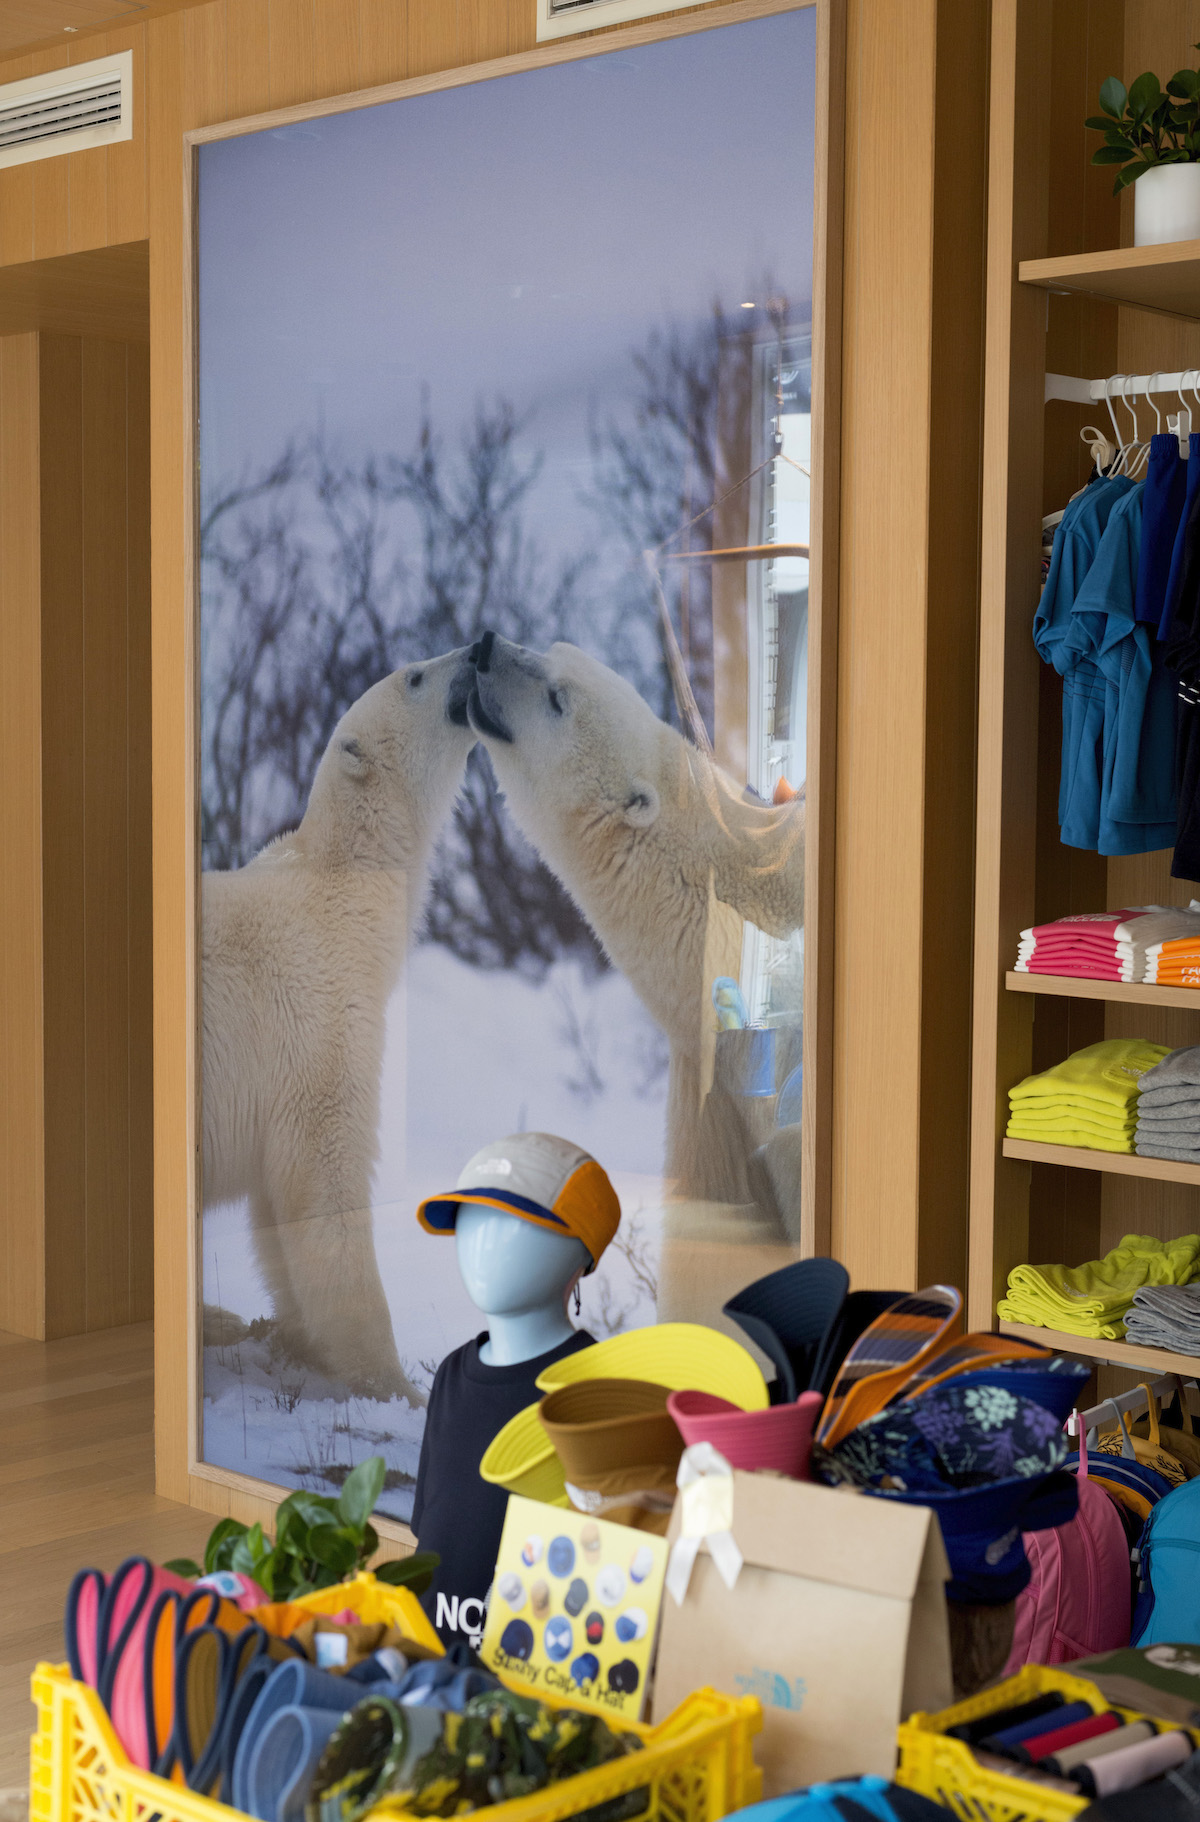 THE NORTH FACE kidsでの展示風景
